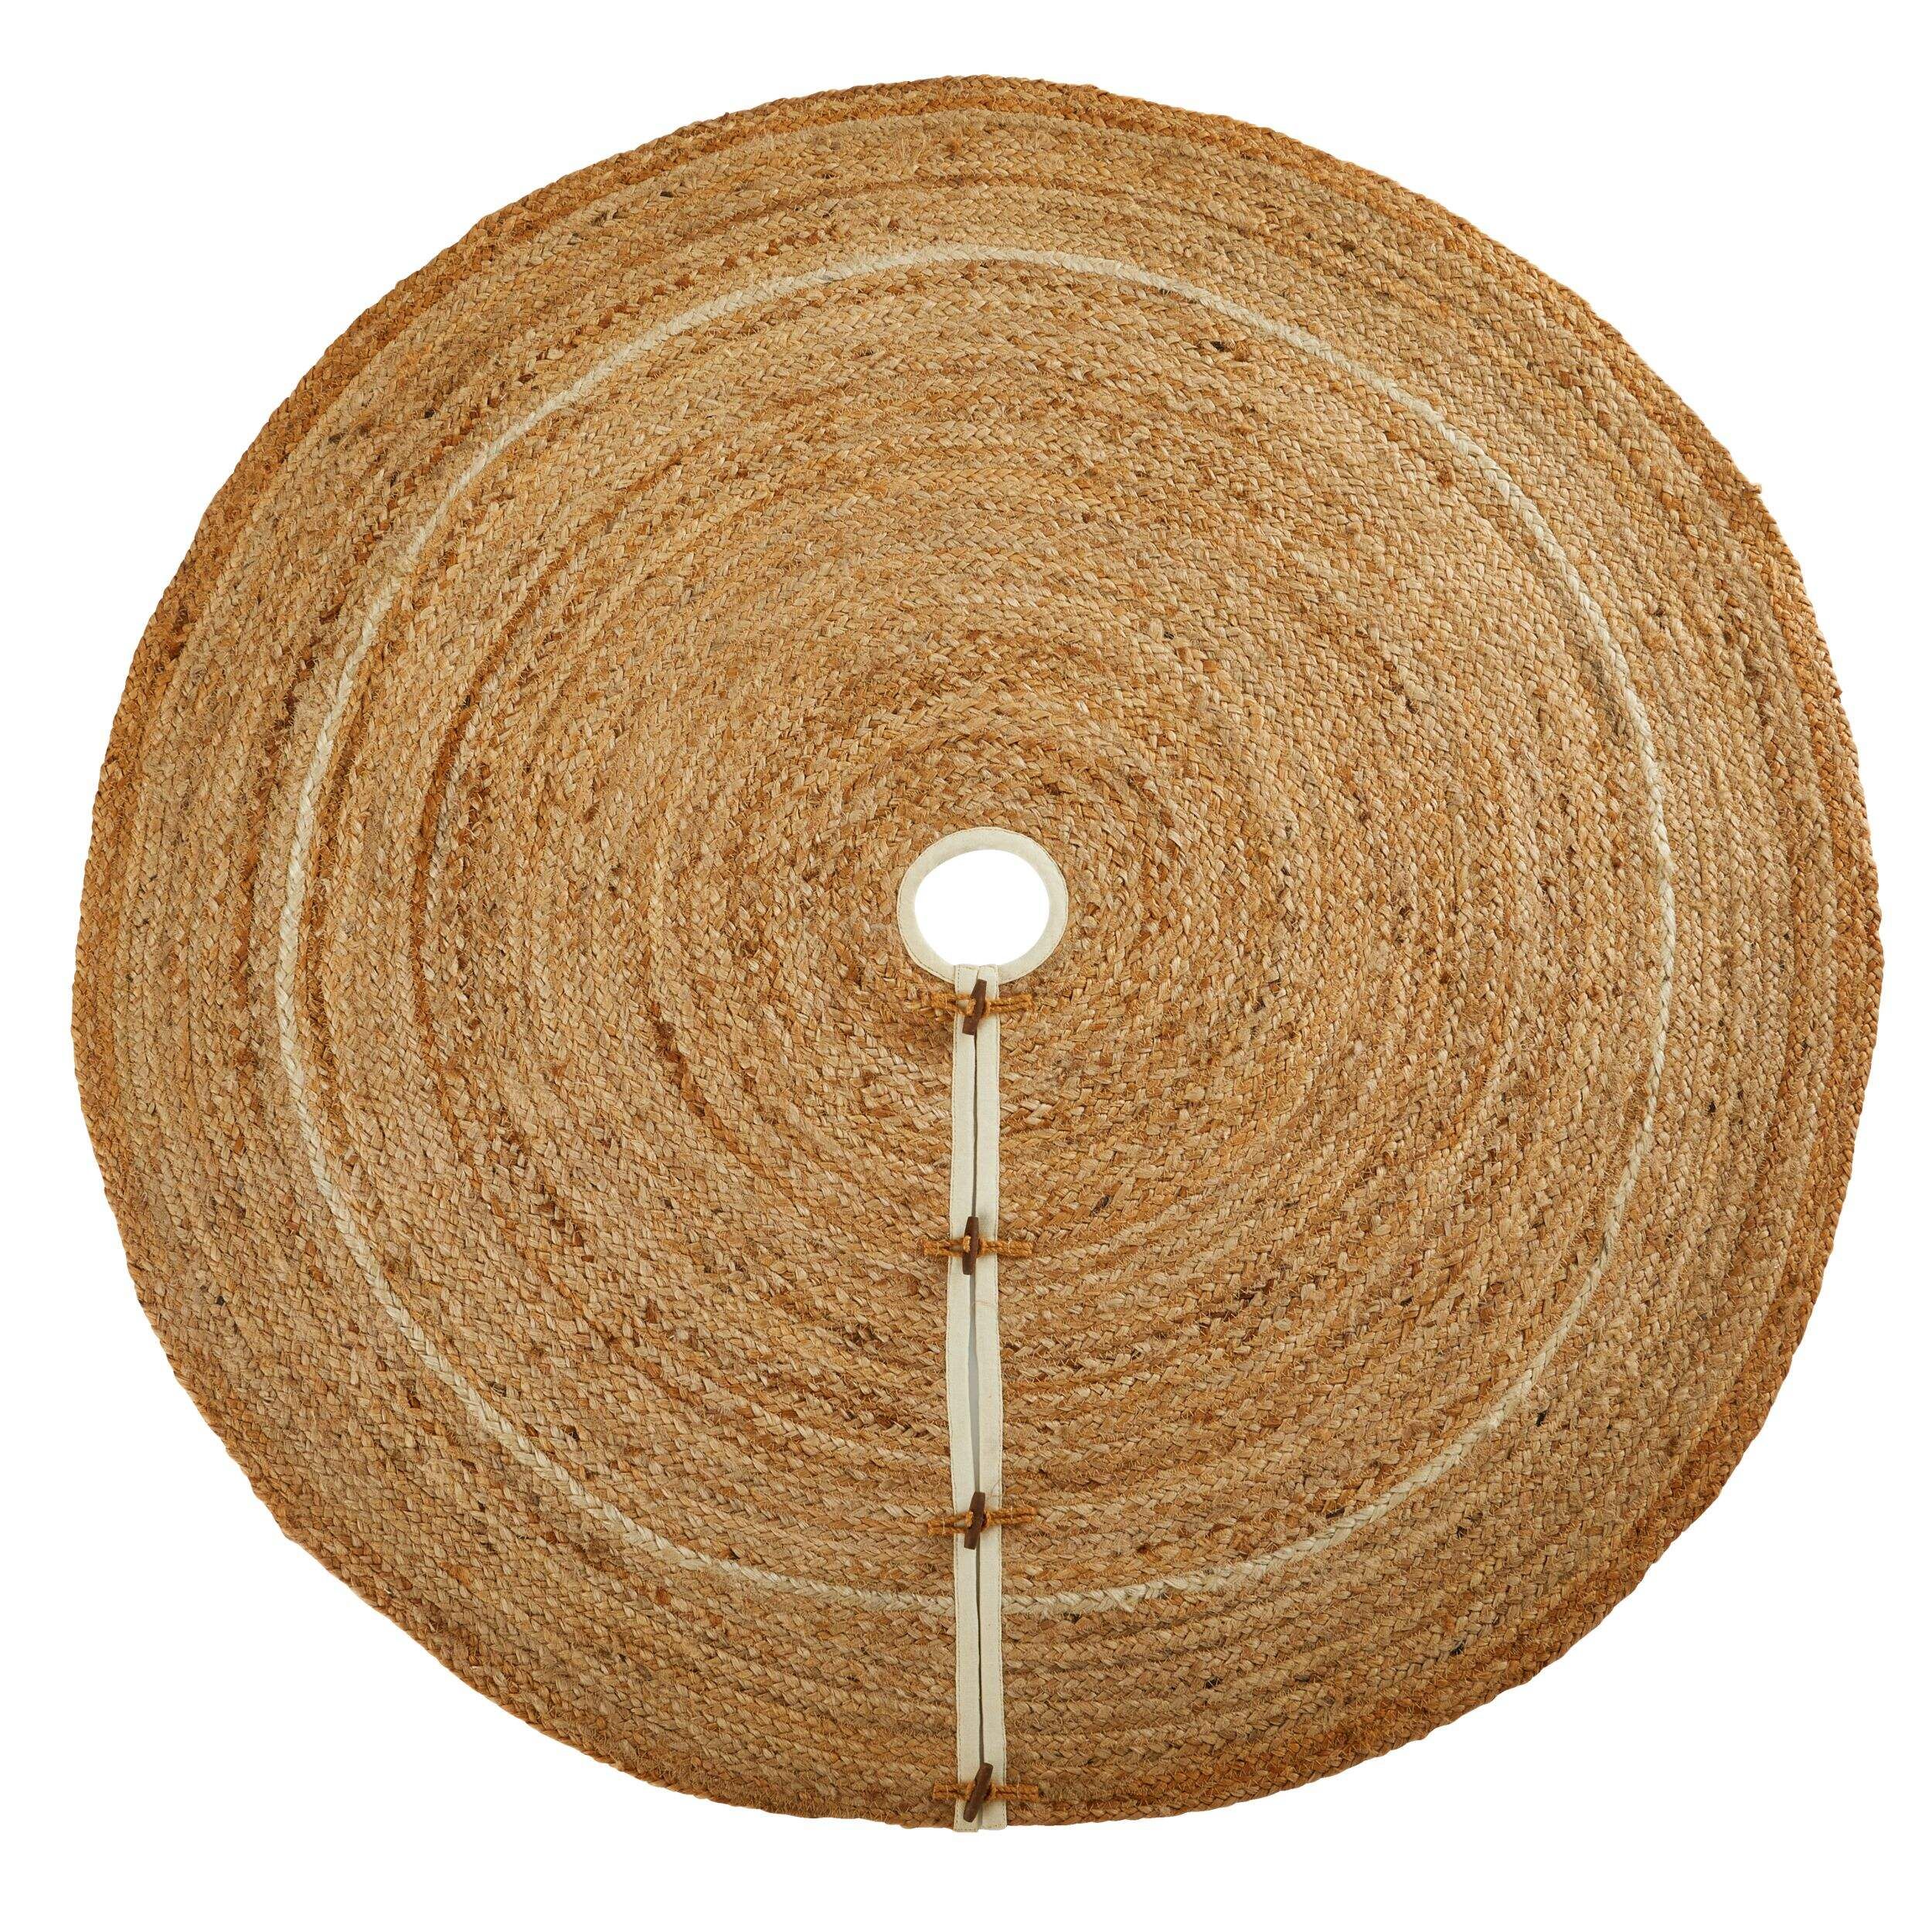 CANVAS Winter Garden Christmas Decoration Sisal Tree Skirt with Wooden Toggles, 48-in | Canadian Tire